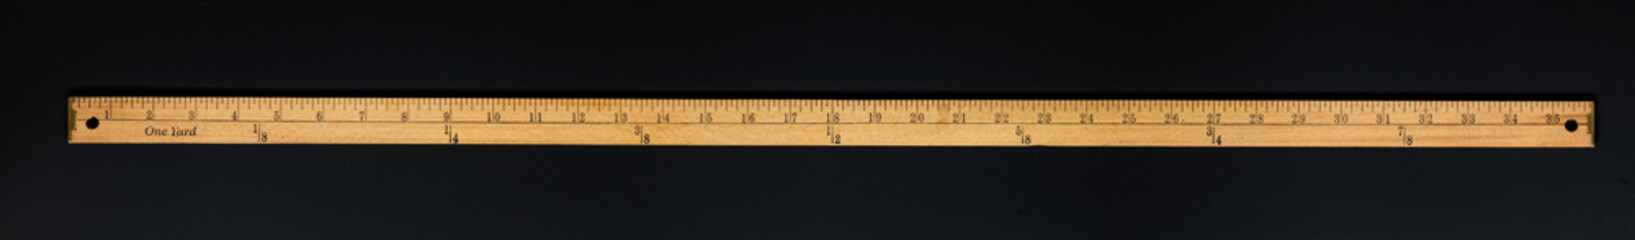 Wooden yardstick on black backgrounds whit inches and yard fractions scales.